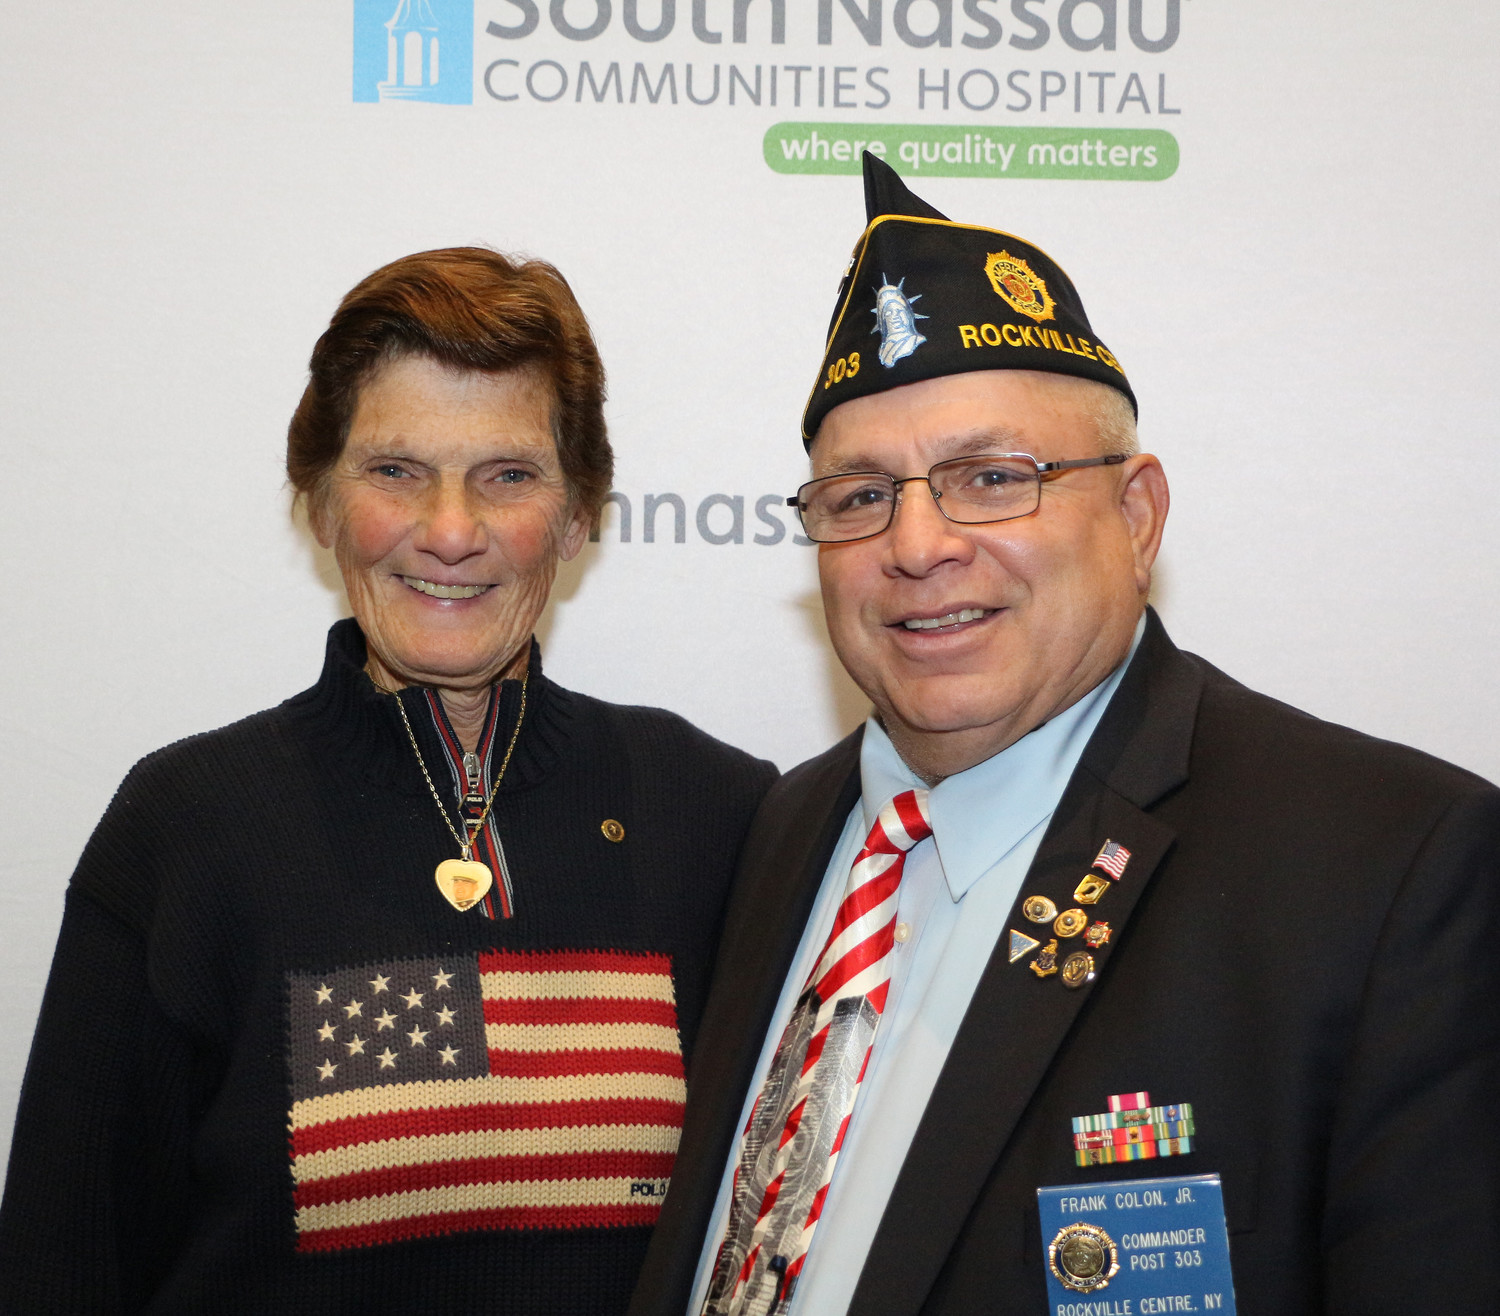 Gold Star mother Marianna Winchester and American Legion Post 303 Commander Frank Colon Jr. Winchester, an Oceanside Middle School Phys. Ed teacher, lost her son, Marine First Lt. Ronald Winchester, in 2004 during his second tour of duty in Iraq.